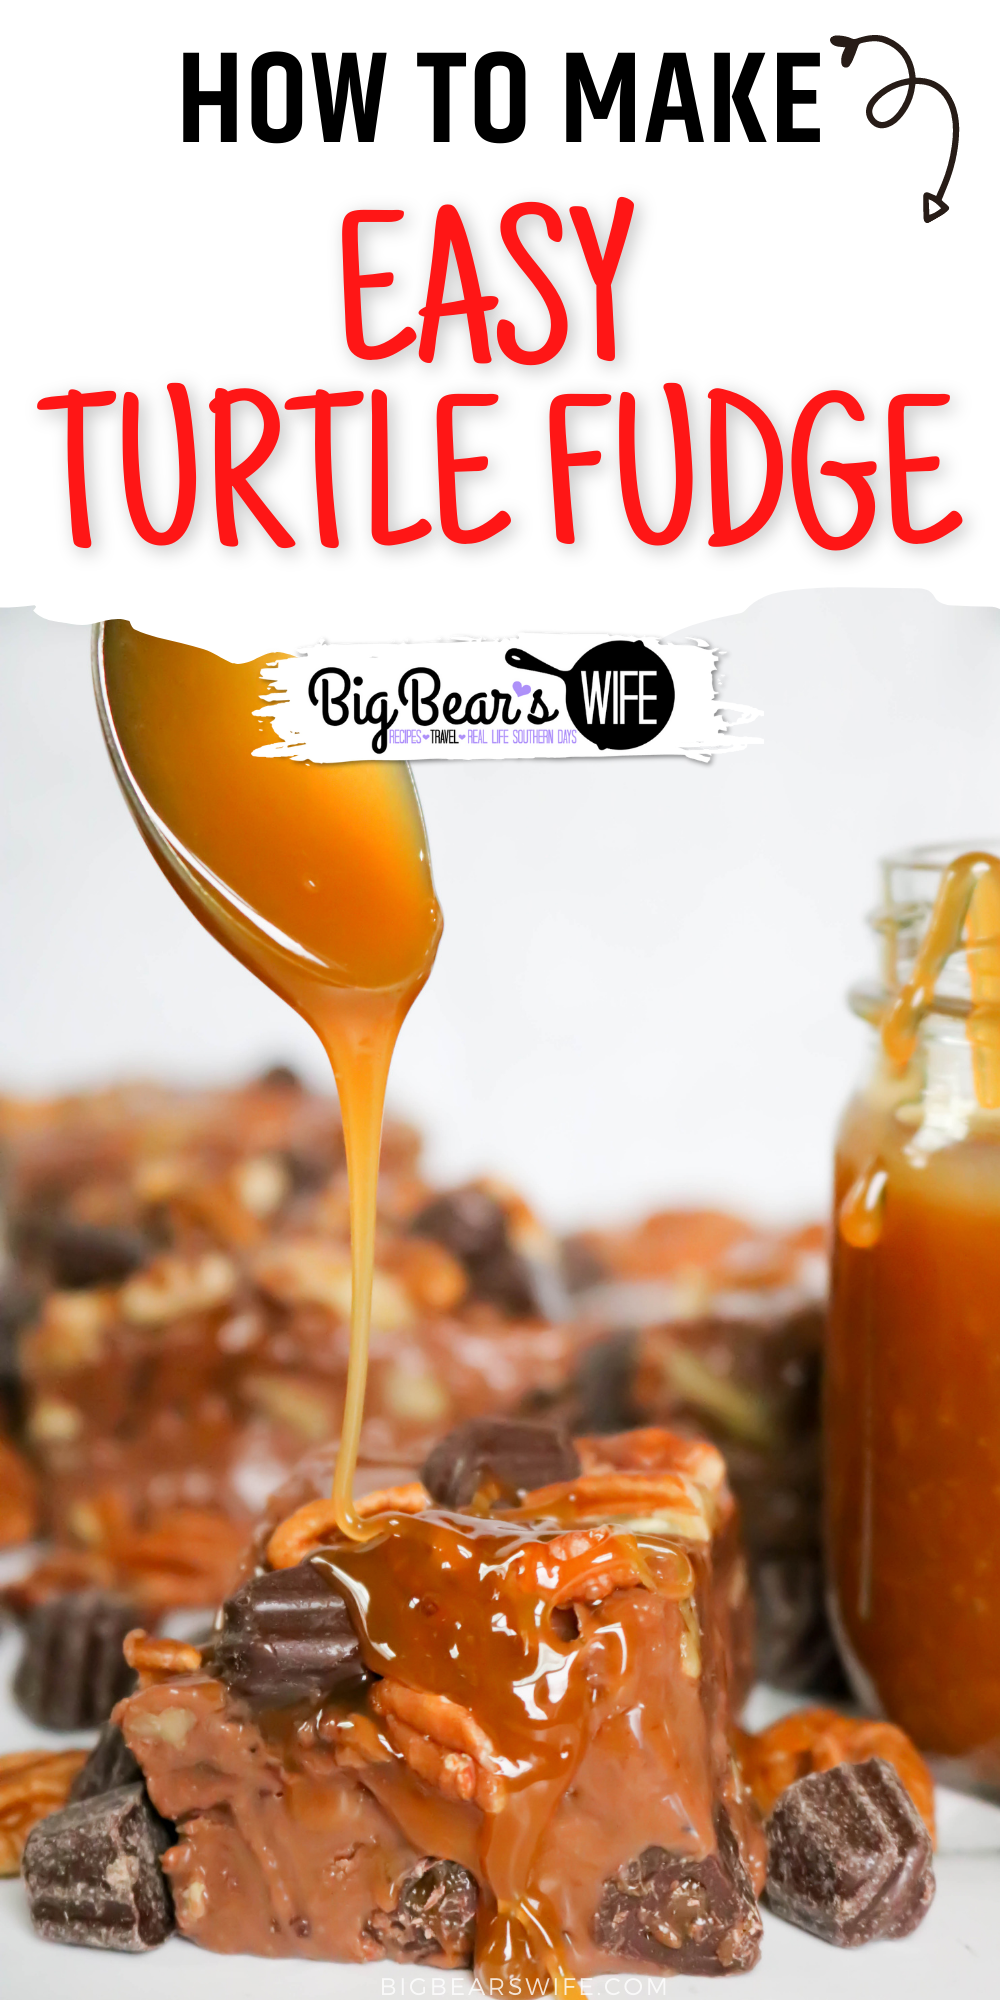 This Super Easy Turtle Fudge is a great dessert or a perfect homemade gift to make for a friend or family member! Super since to make and always delicious. This fudge is filled with chocolate, caramel and pecans!  via @bigbearswife